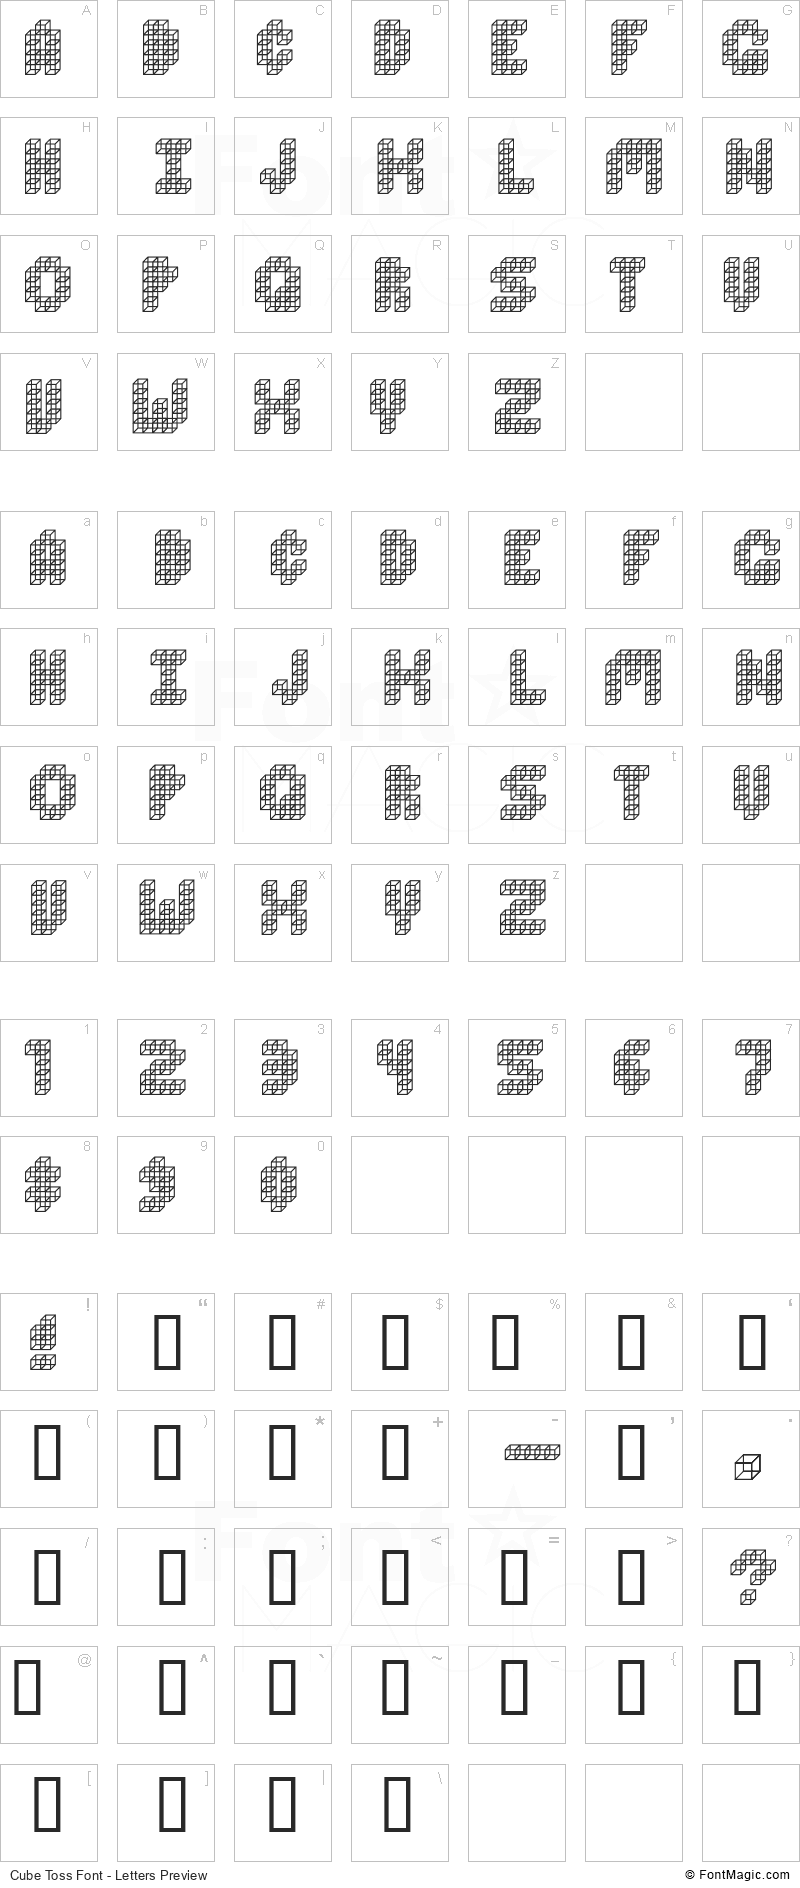 Cube Toss Font - All Latters Preview Chart